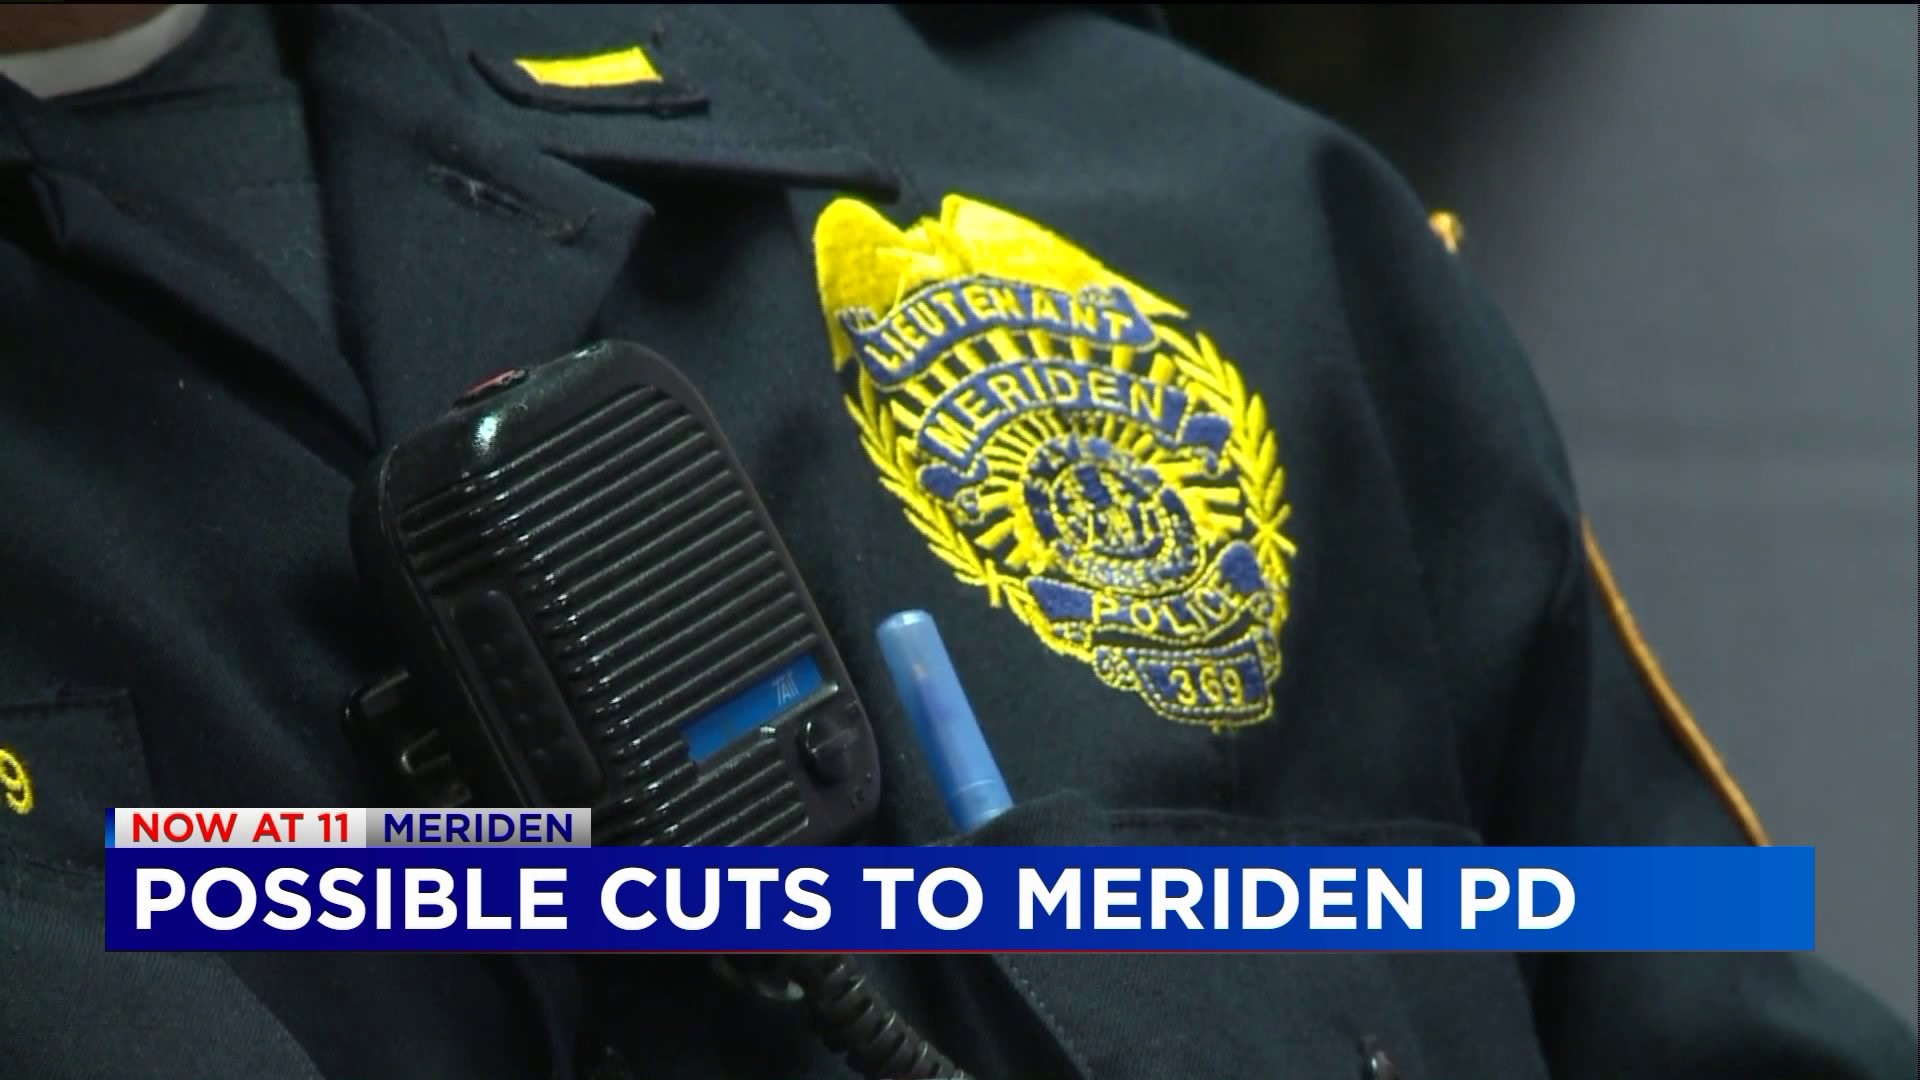 Meriden residents voice anger over cuts to police